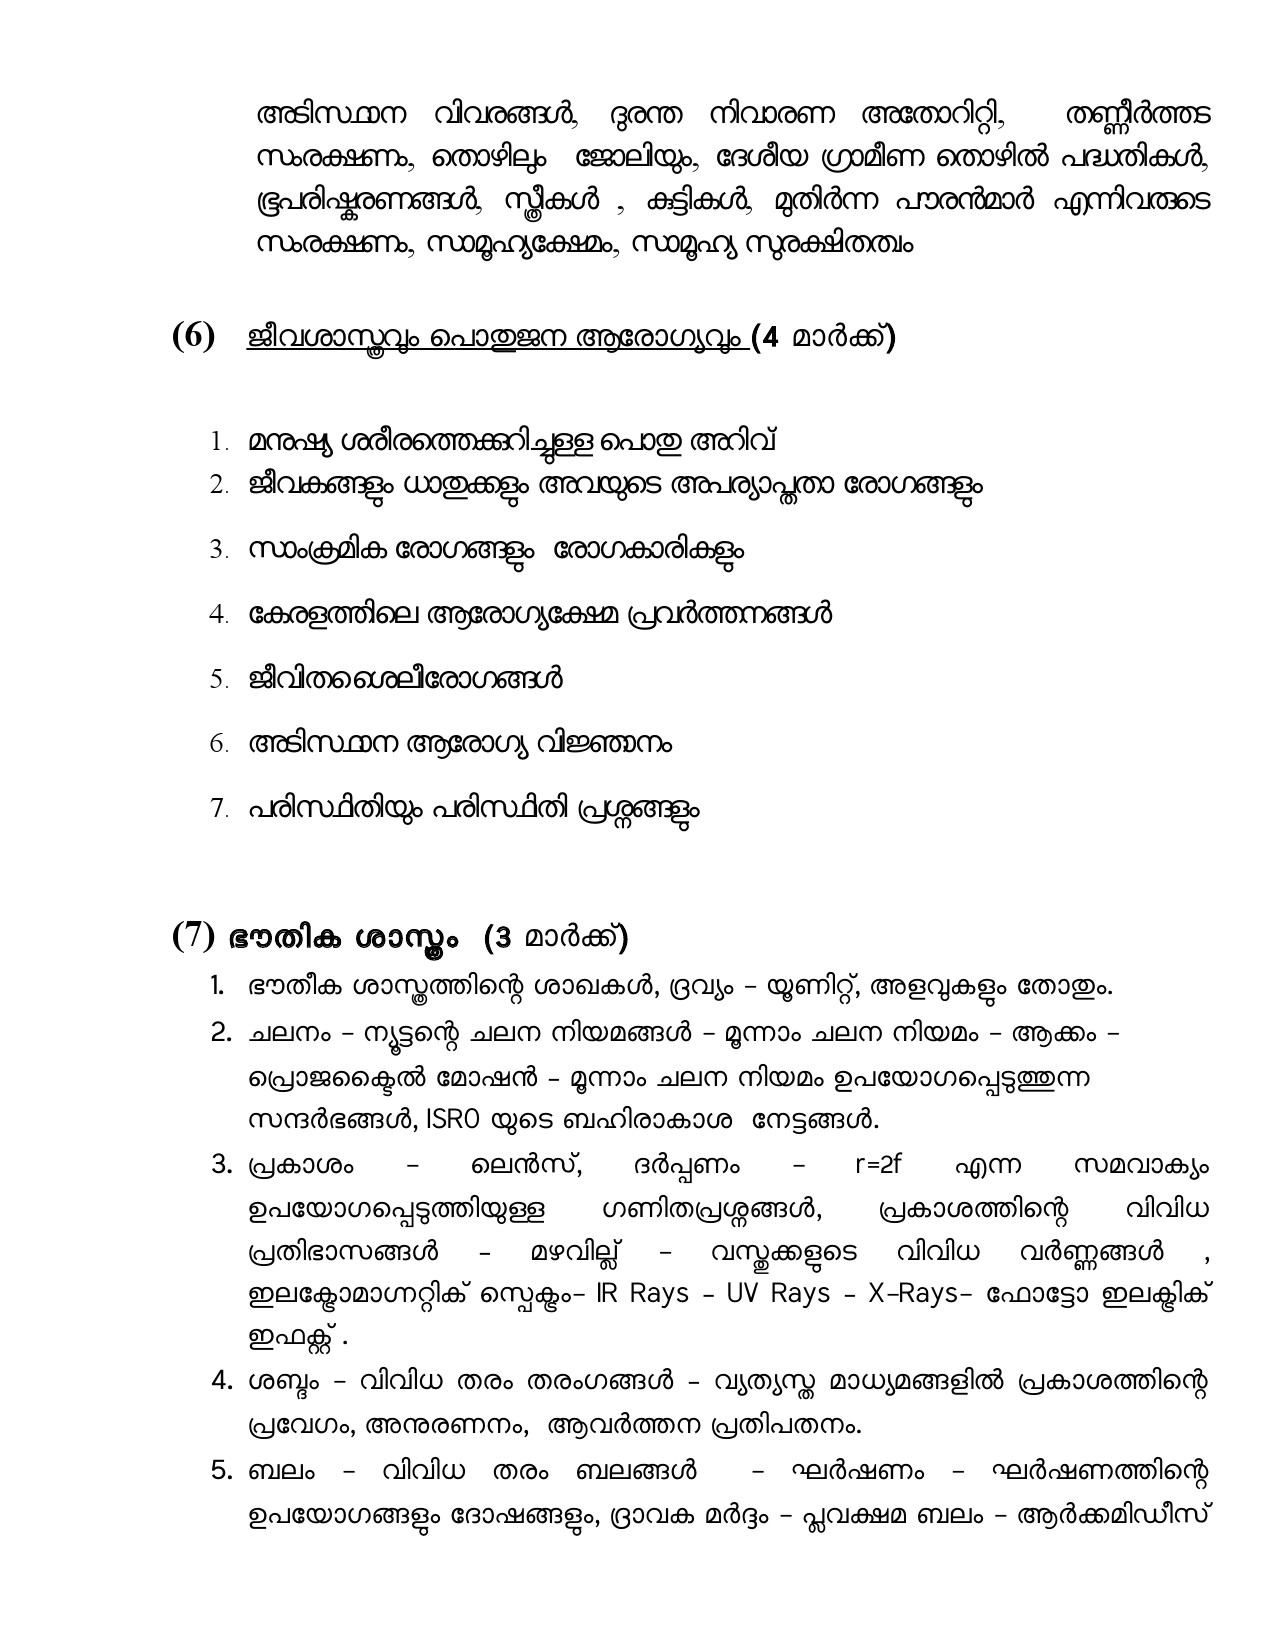 Syllabus For 2023 OMR Examination Of Civil Police Officer - Notification Image 4